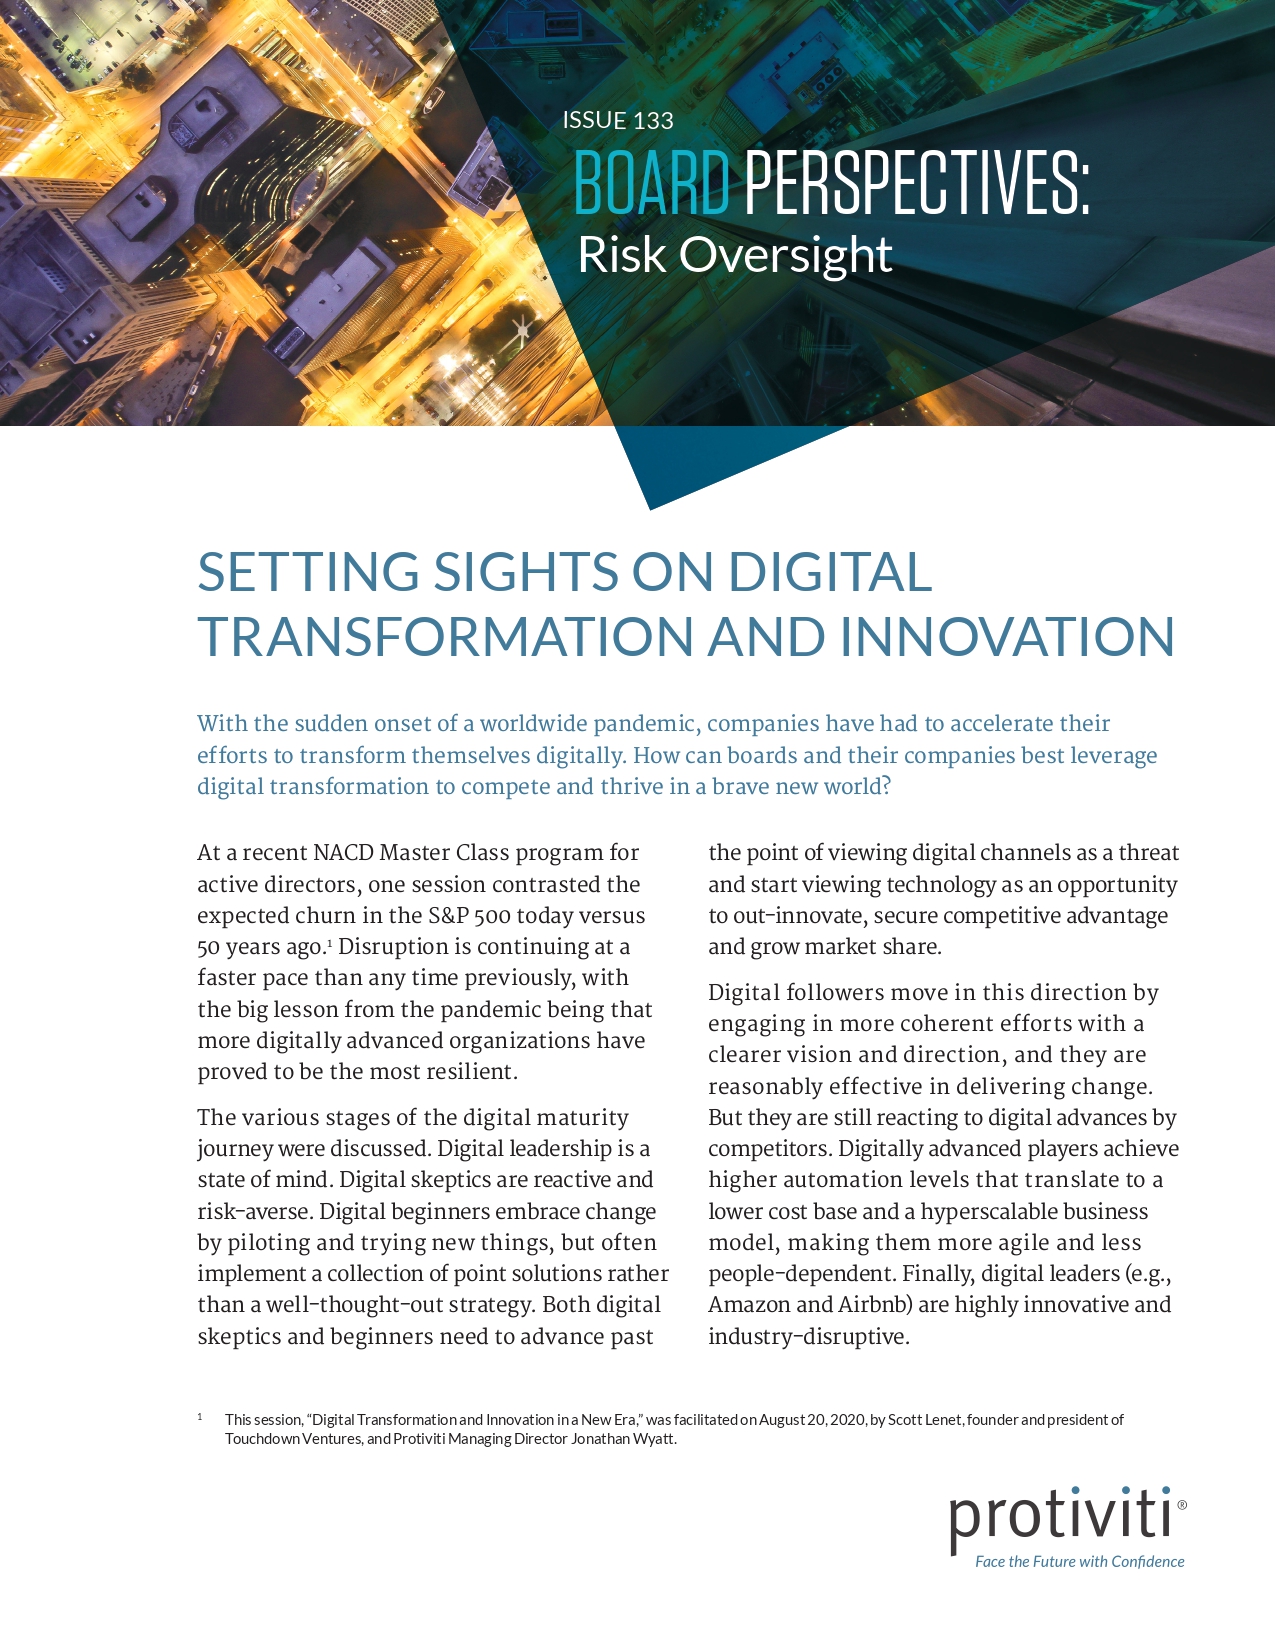 Setting Sights on Digital Transformation and Innovation